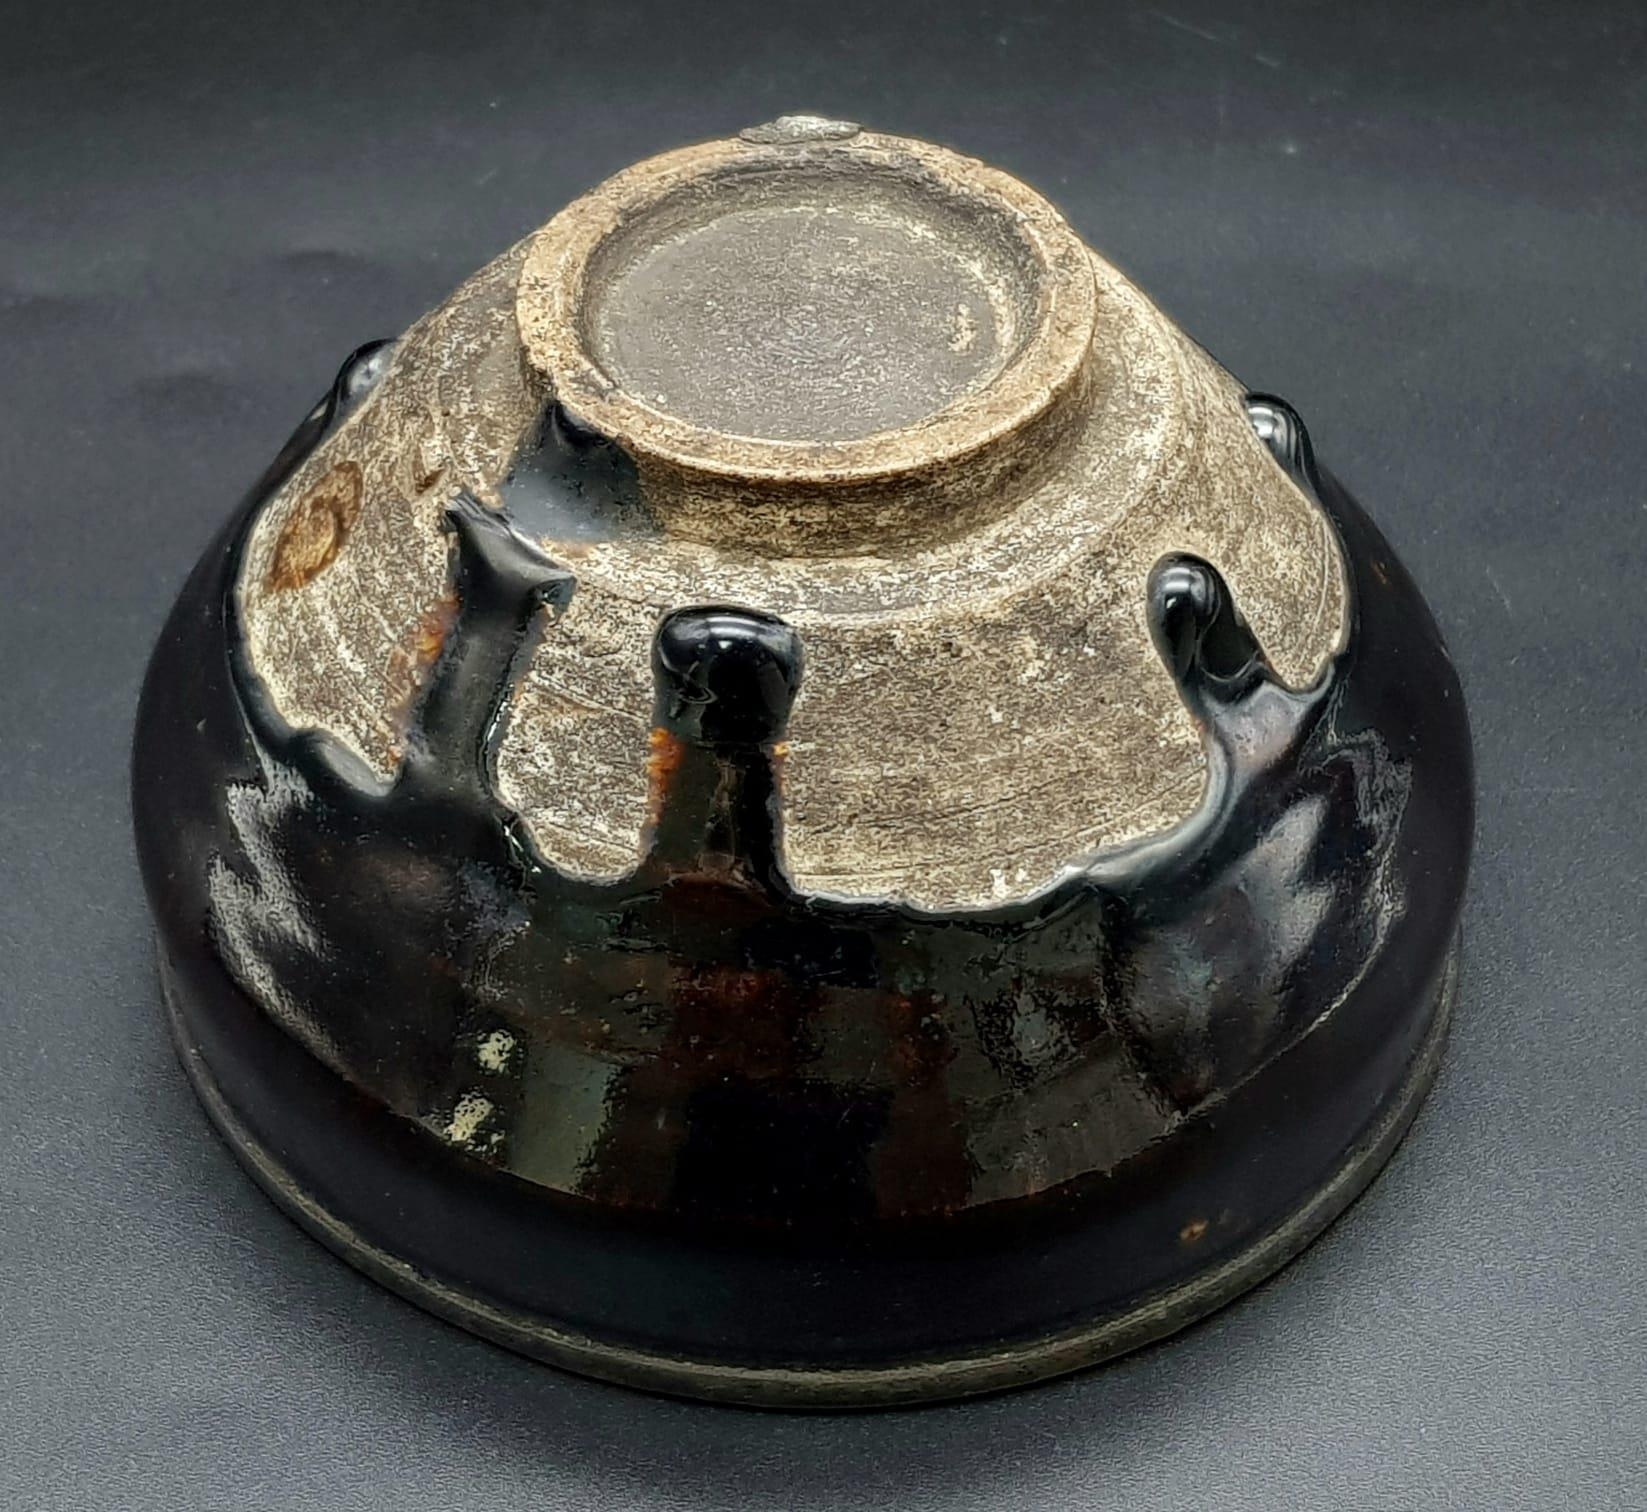 A VERY RARE CHINESE SONG PERIOD (900-1200) JIAN TEA BOWL , WITH A UNIQUE METAL BAND AROUND THE RIM - Bild 3 aus 6